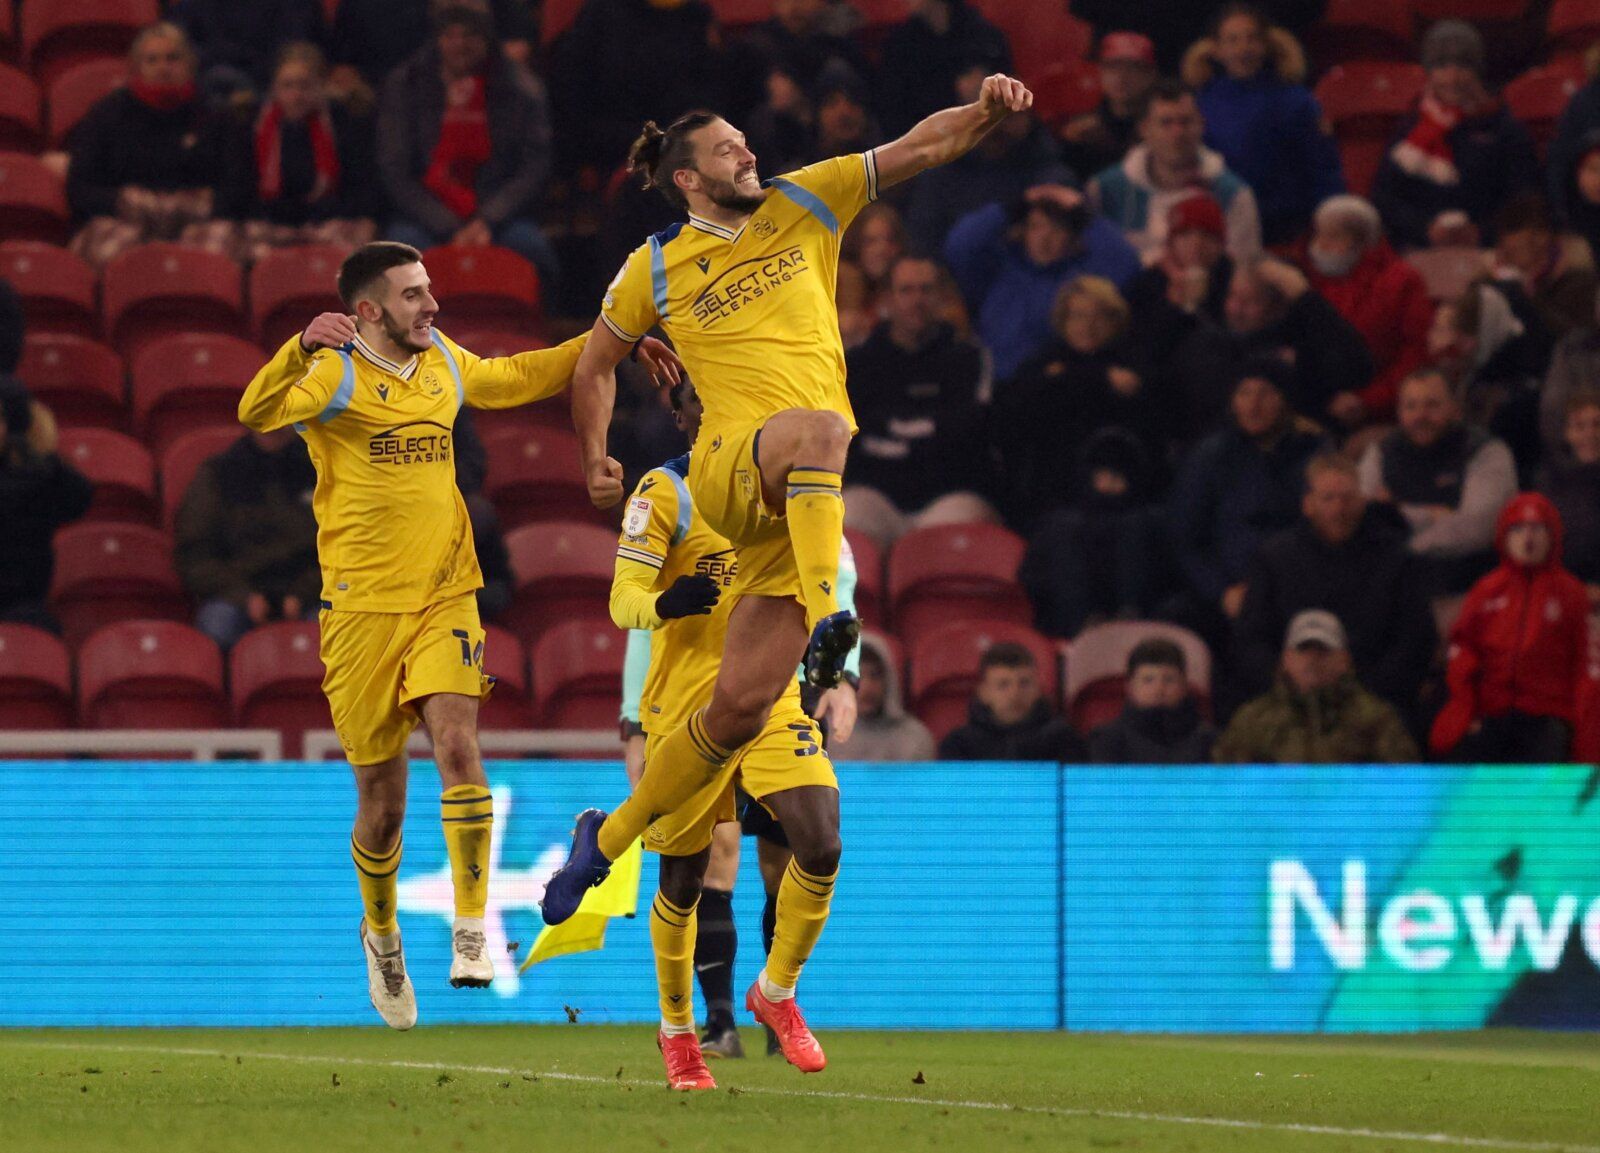 Soccer Football - Championship - Middlesbrough v Reading - Riverside Stadium, Middlesbrough, Britain - January 15, 2022  Reading's Andy Carroll celebrates scoring their first goal with teammates  Action Images/John Clifton  EDITORIAL USE ONLY. No use with unauthorized audio, video, data, fixture lists, club/league logos or 